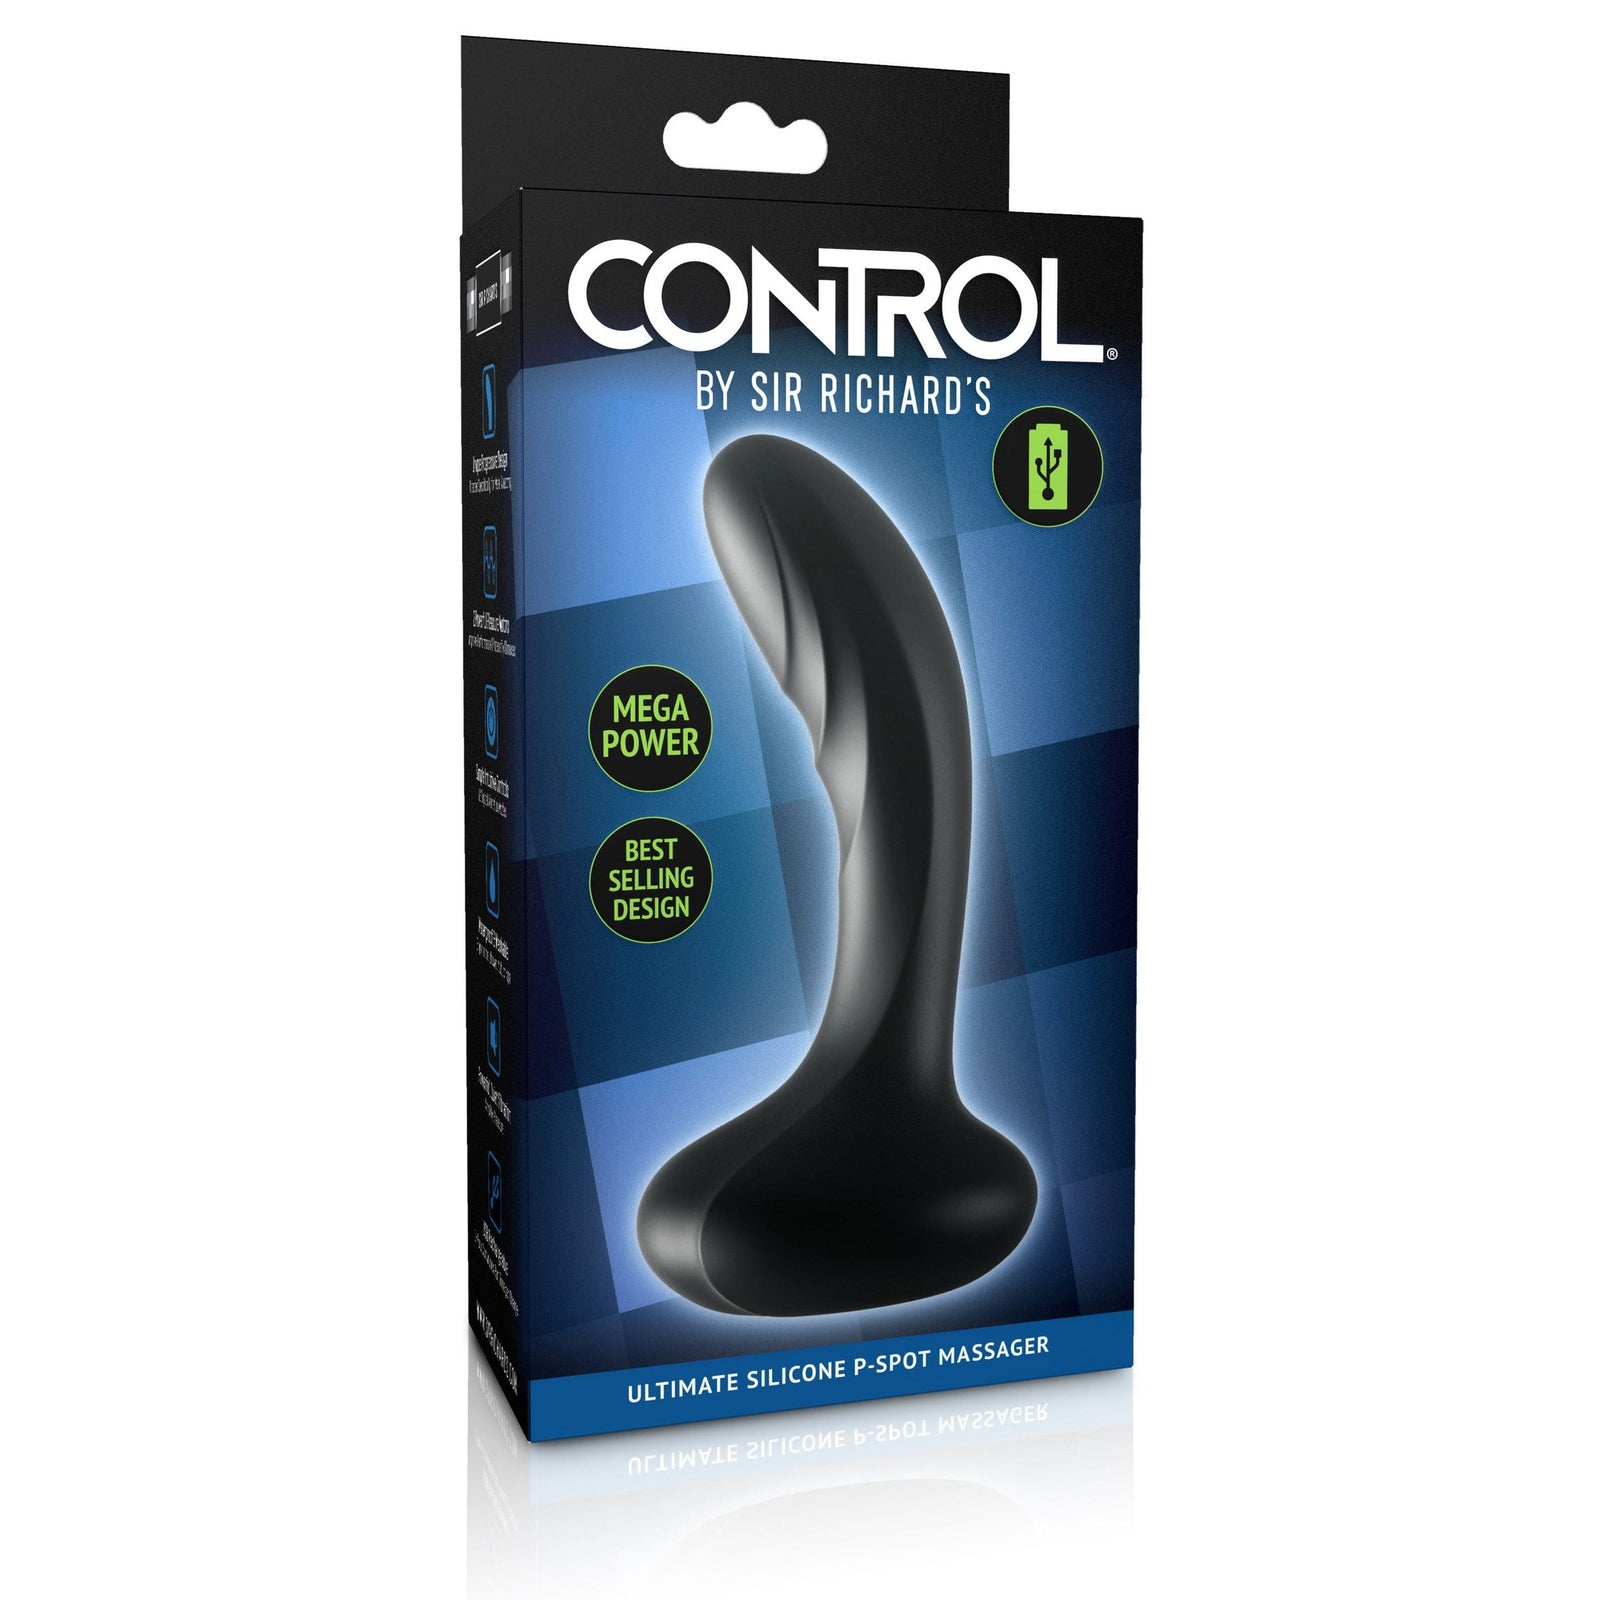 Sir Richards - Control Ulitimate Silicone P-Spot Massager (Black) Prostate Massager (Vibration) Rechargeable 319986979 CherryAffairs